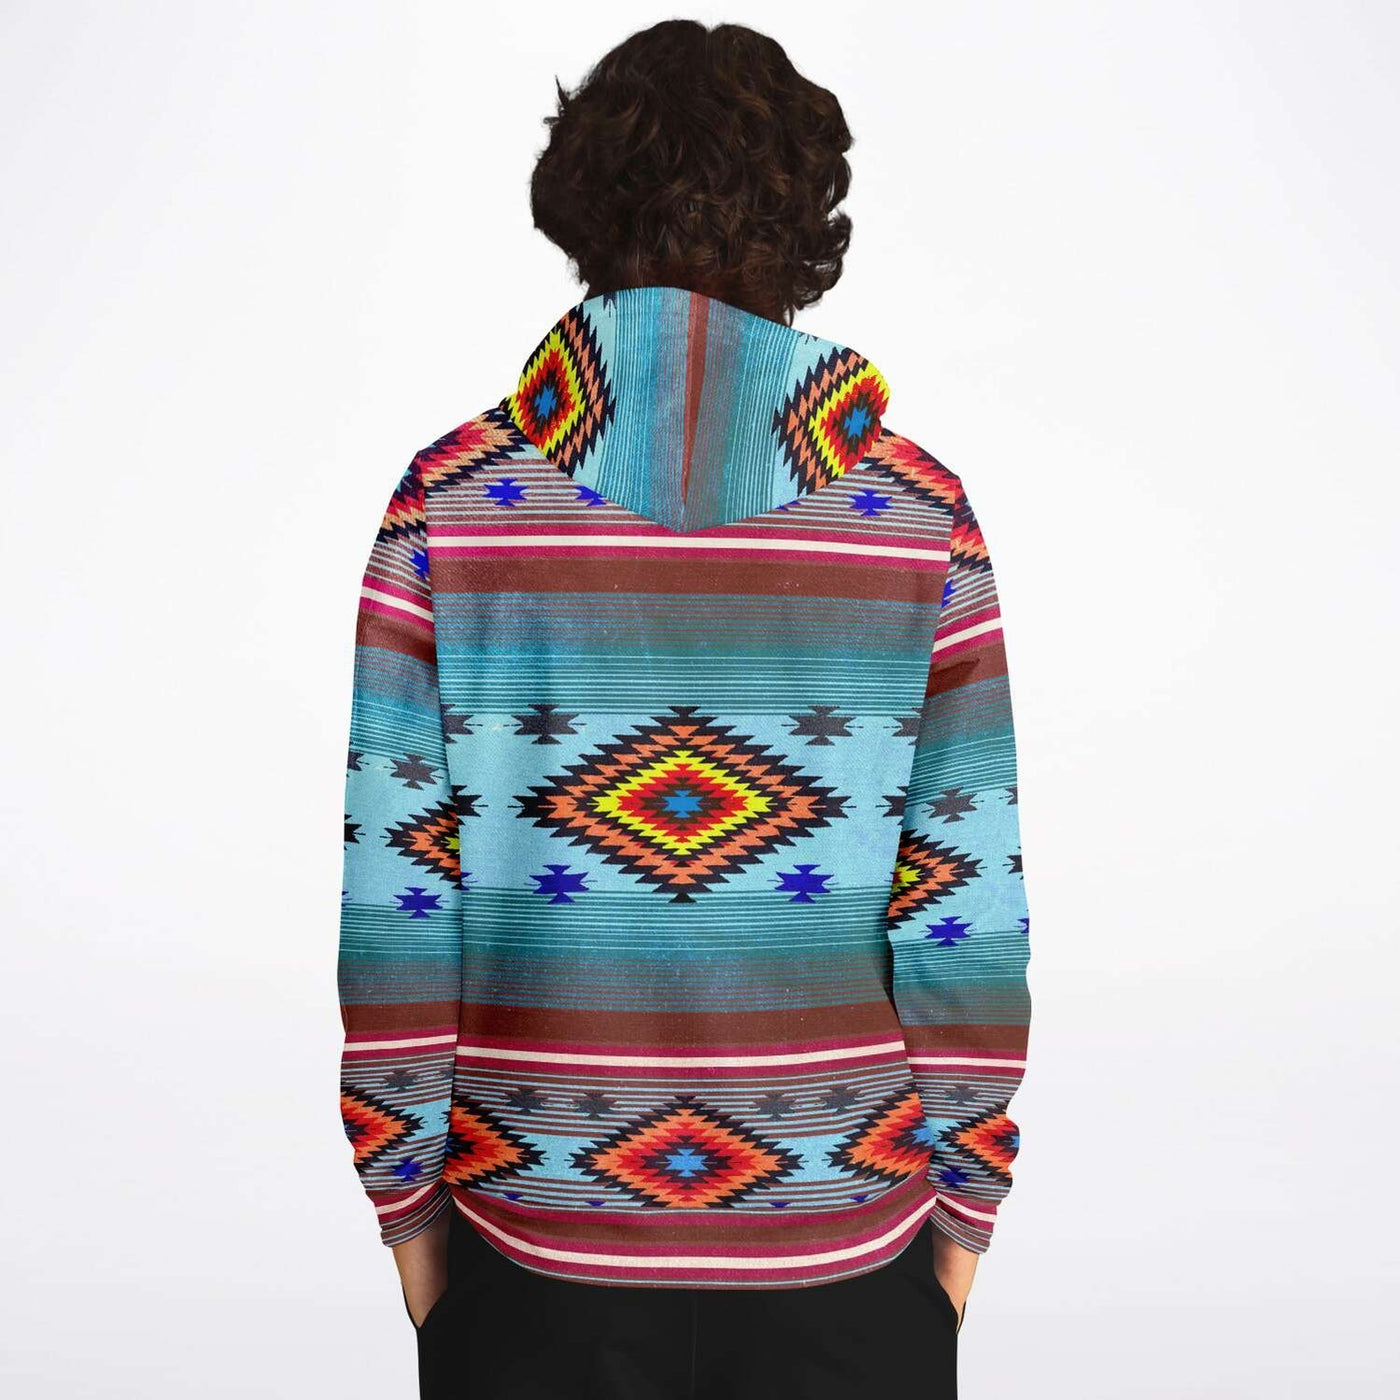 Native American Hoodie with Bright Blue Red Shamanic Tribal Pattern